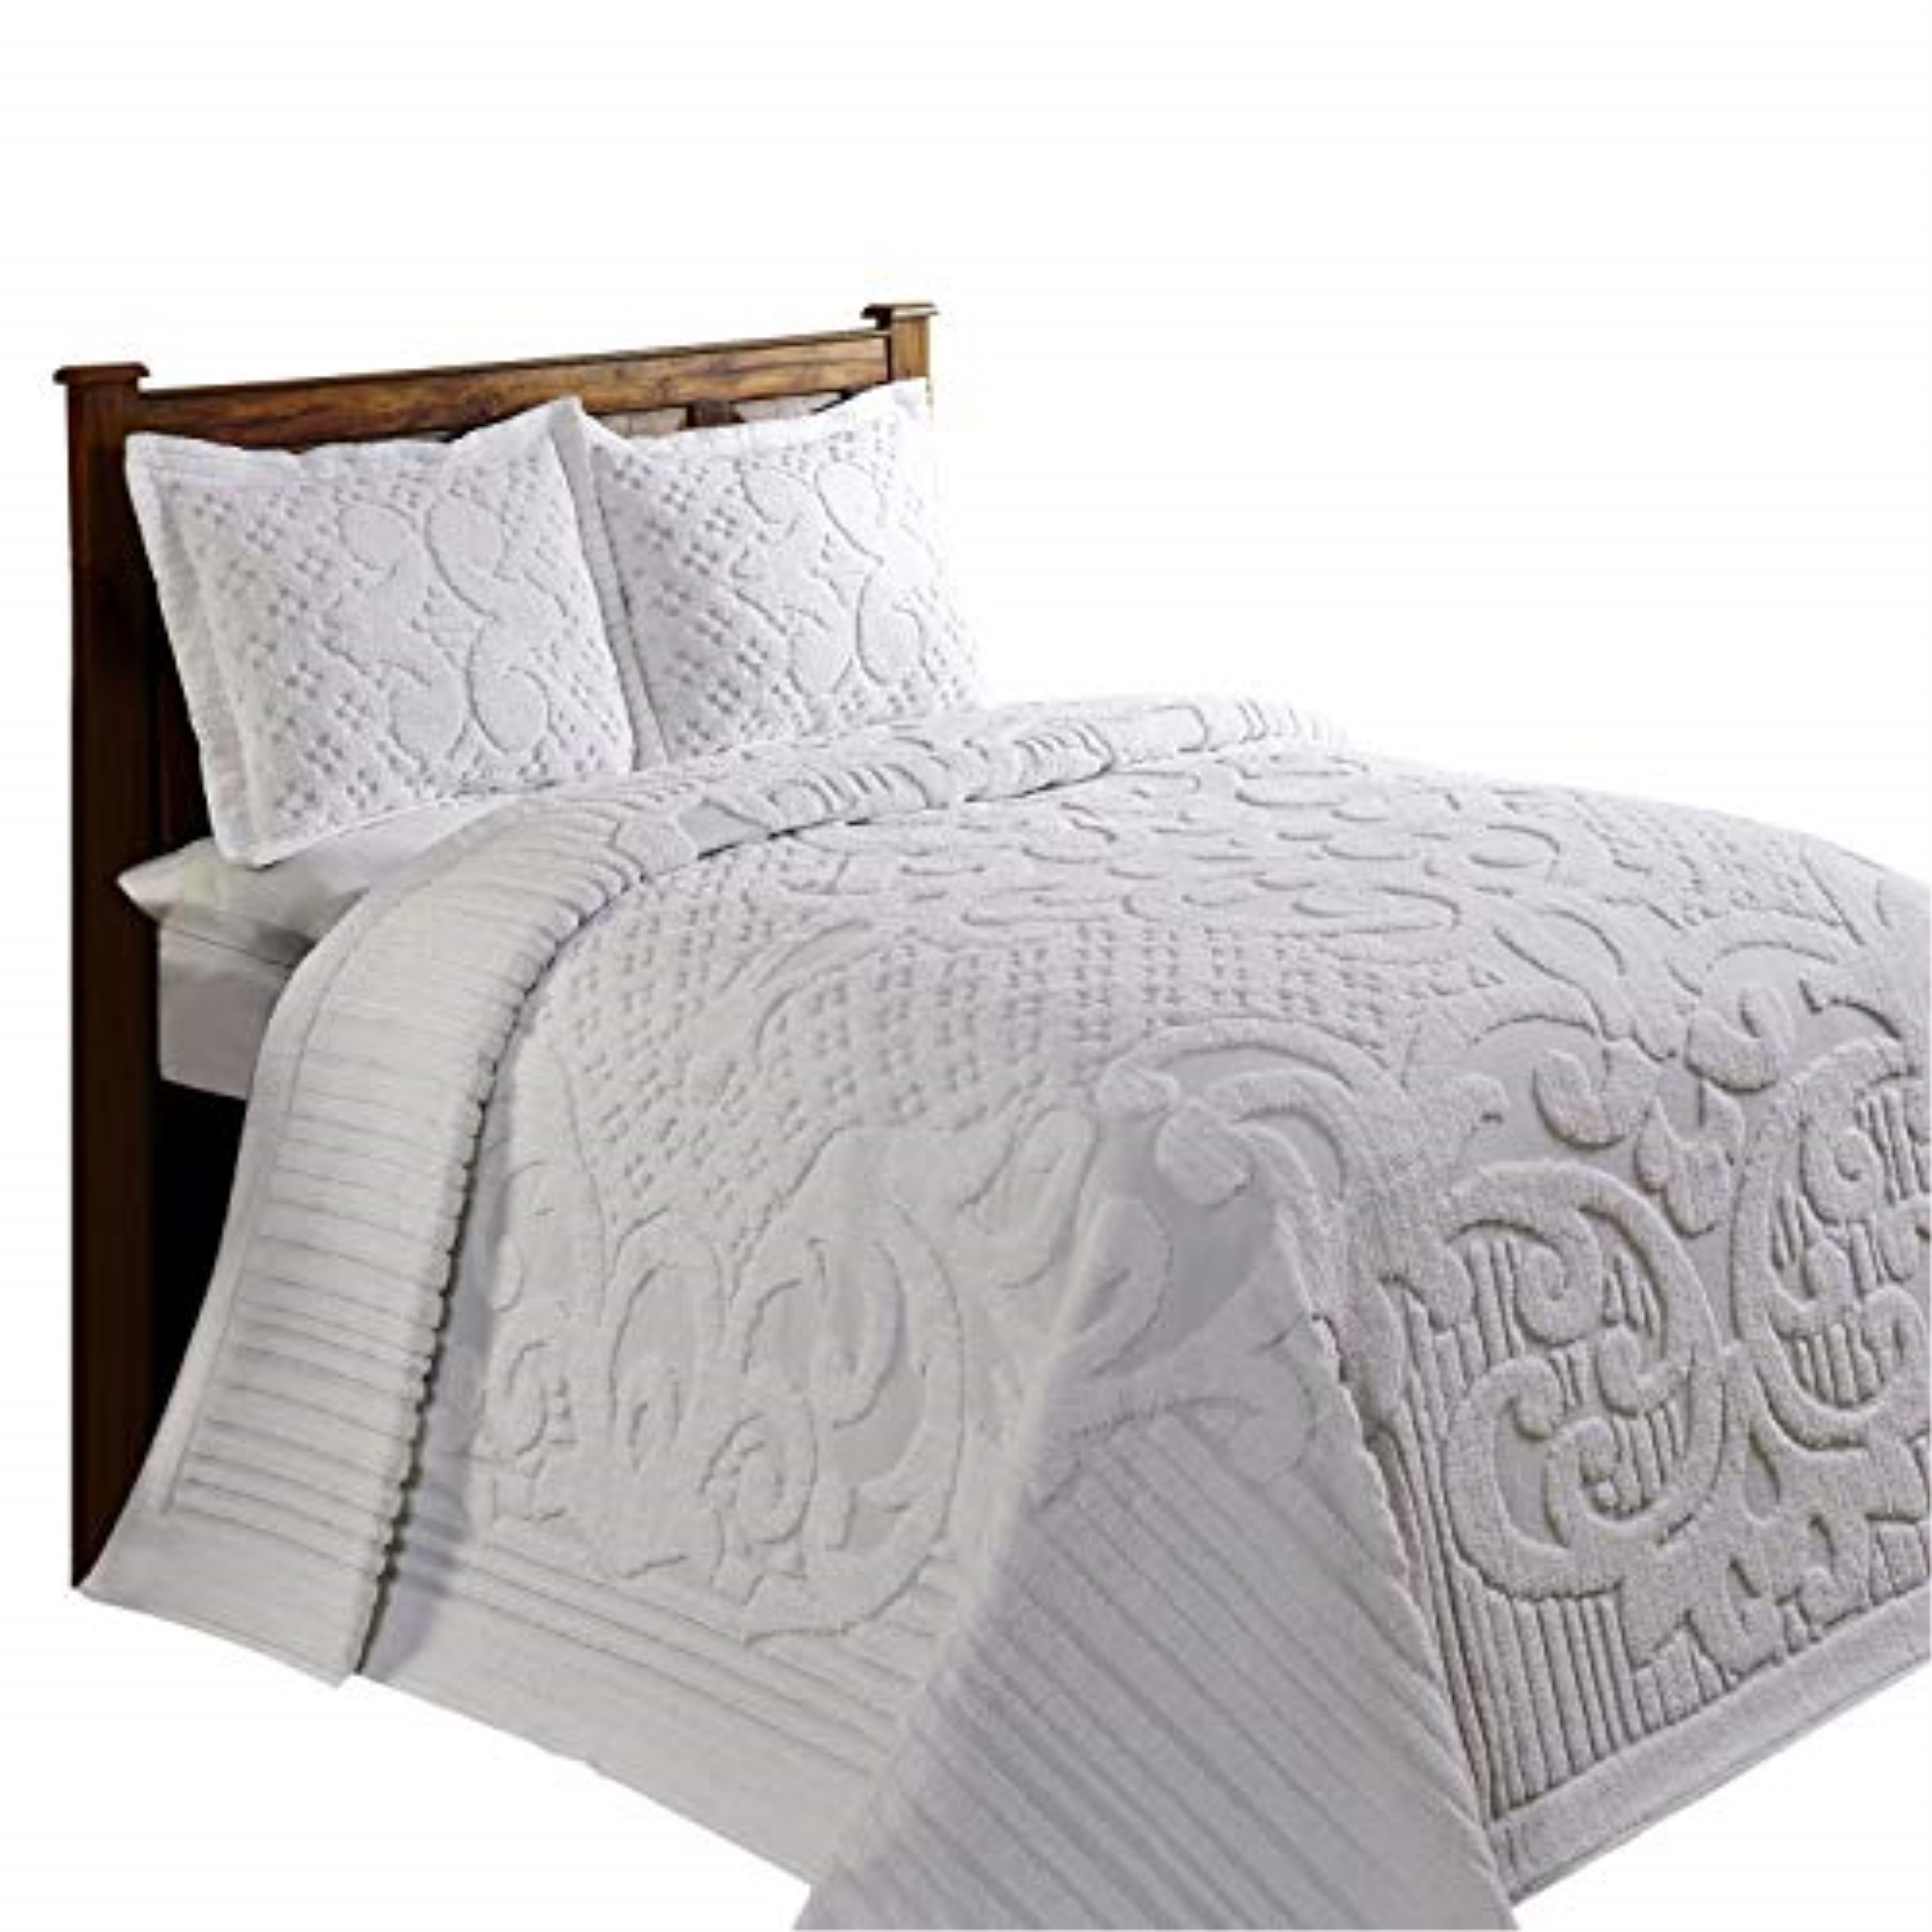 Better Trends Ashton Collection Twin Bedspread in White